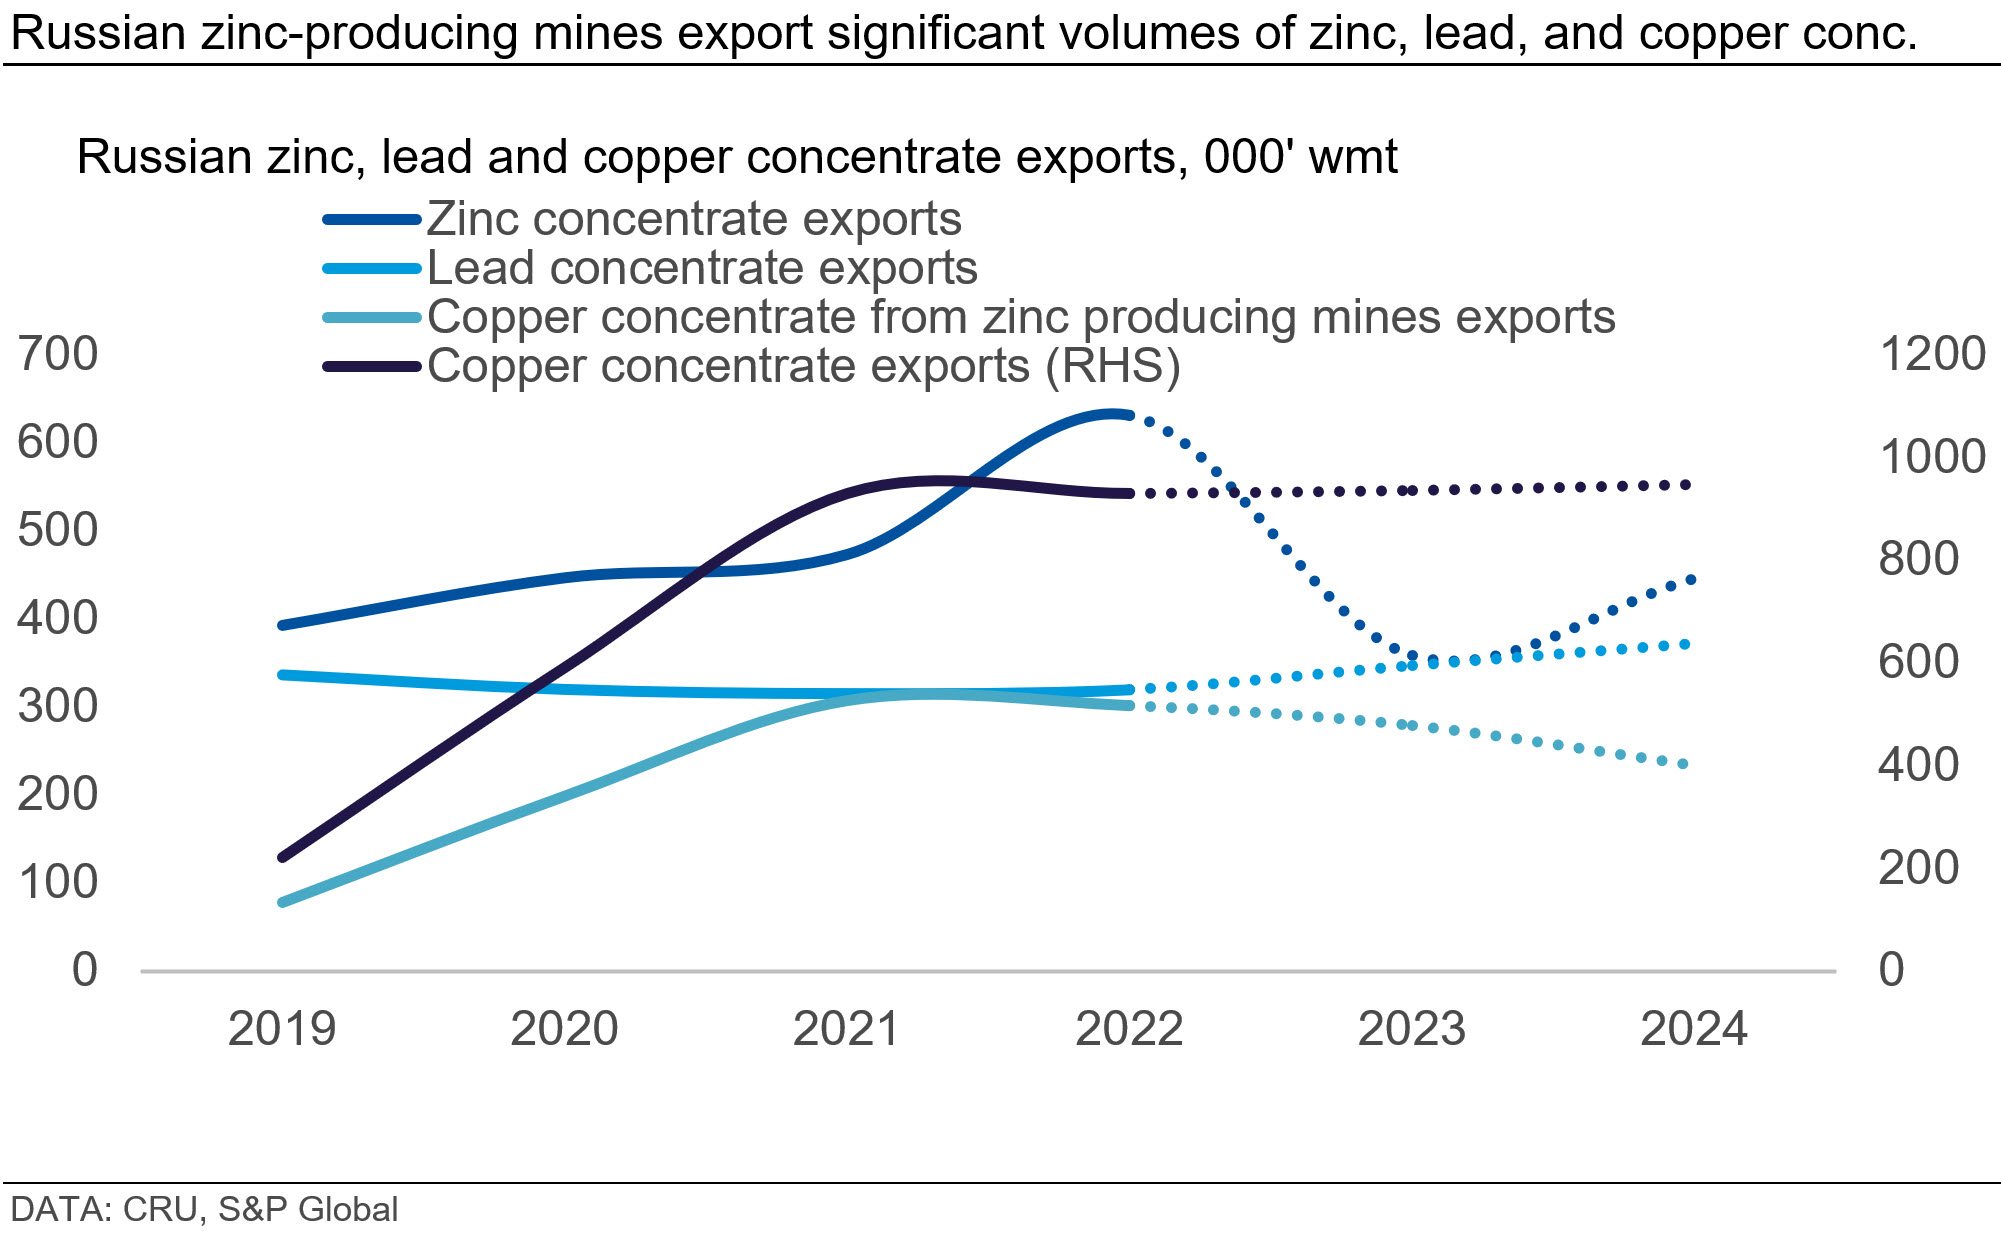 Graph showing that Russian zinc-producing mines export significant volumes of zinc, lead, and copper conc.